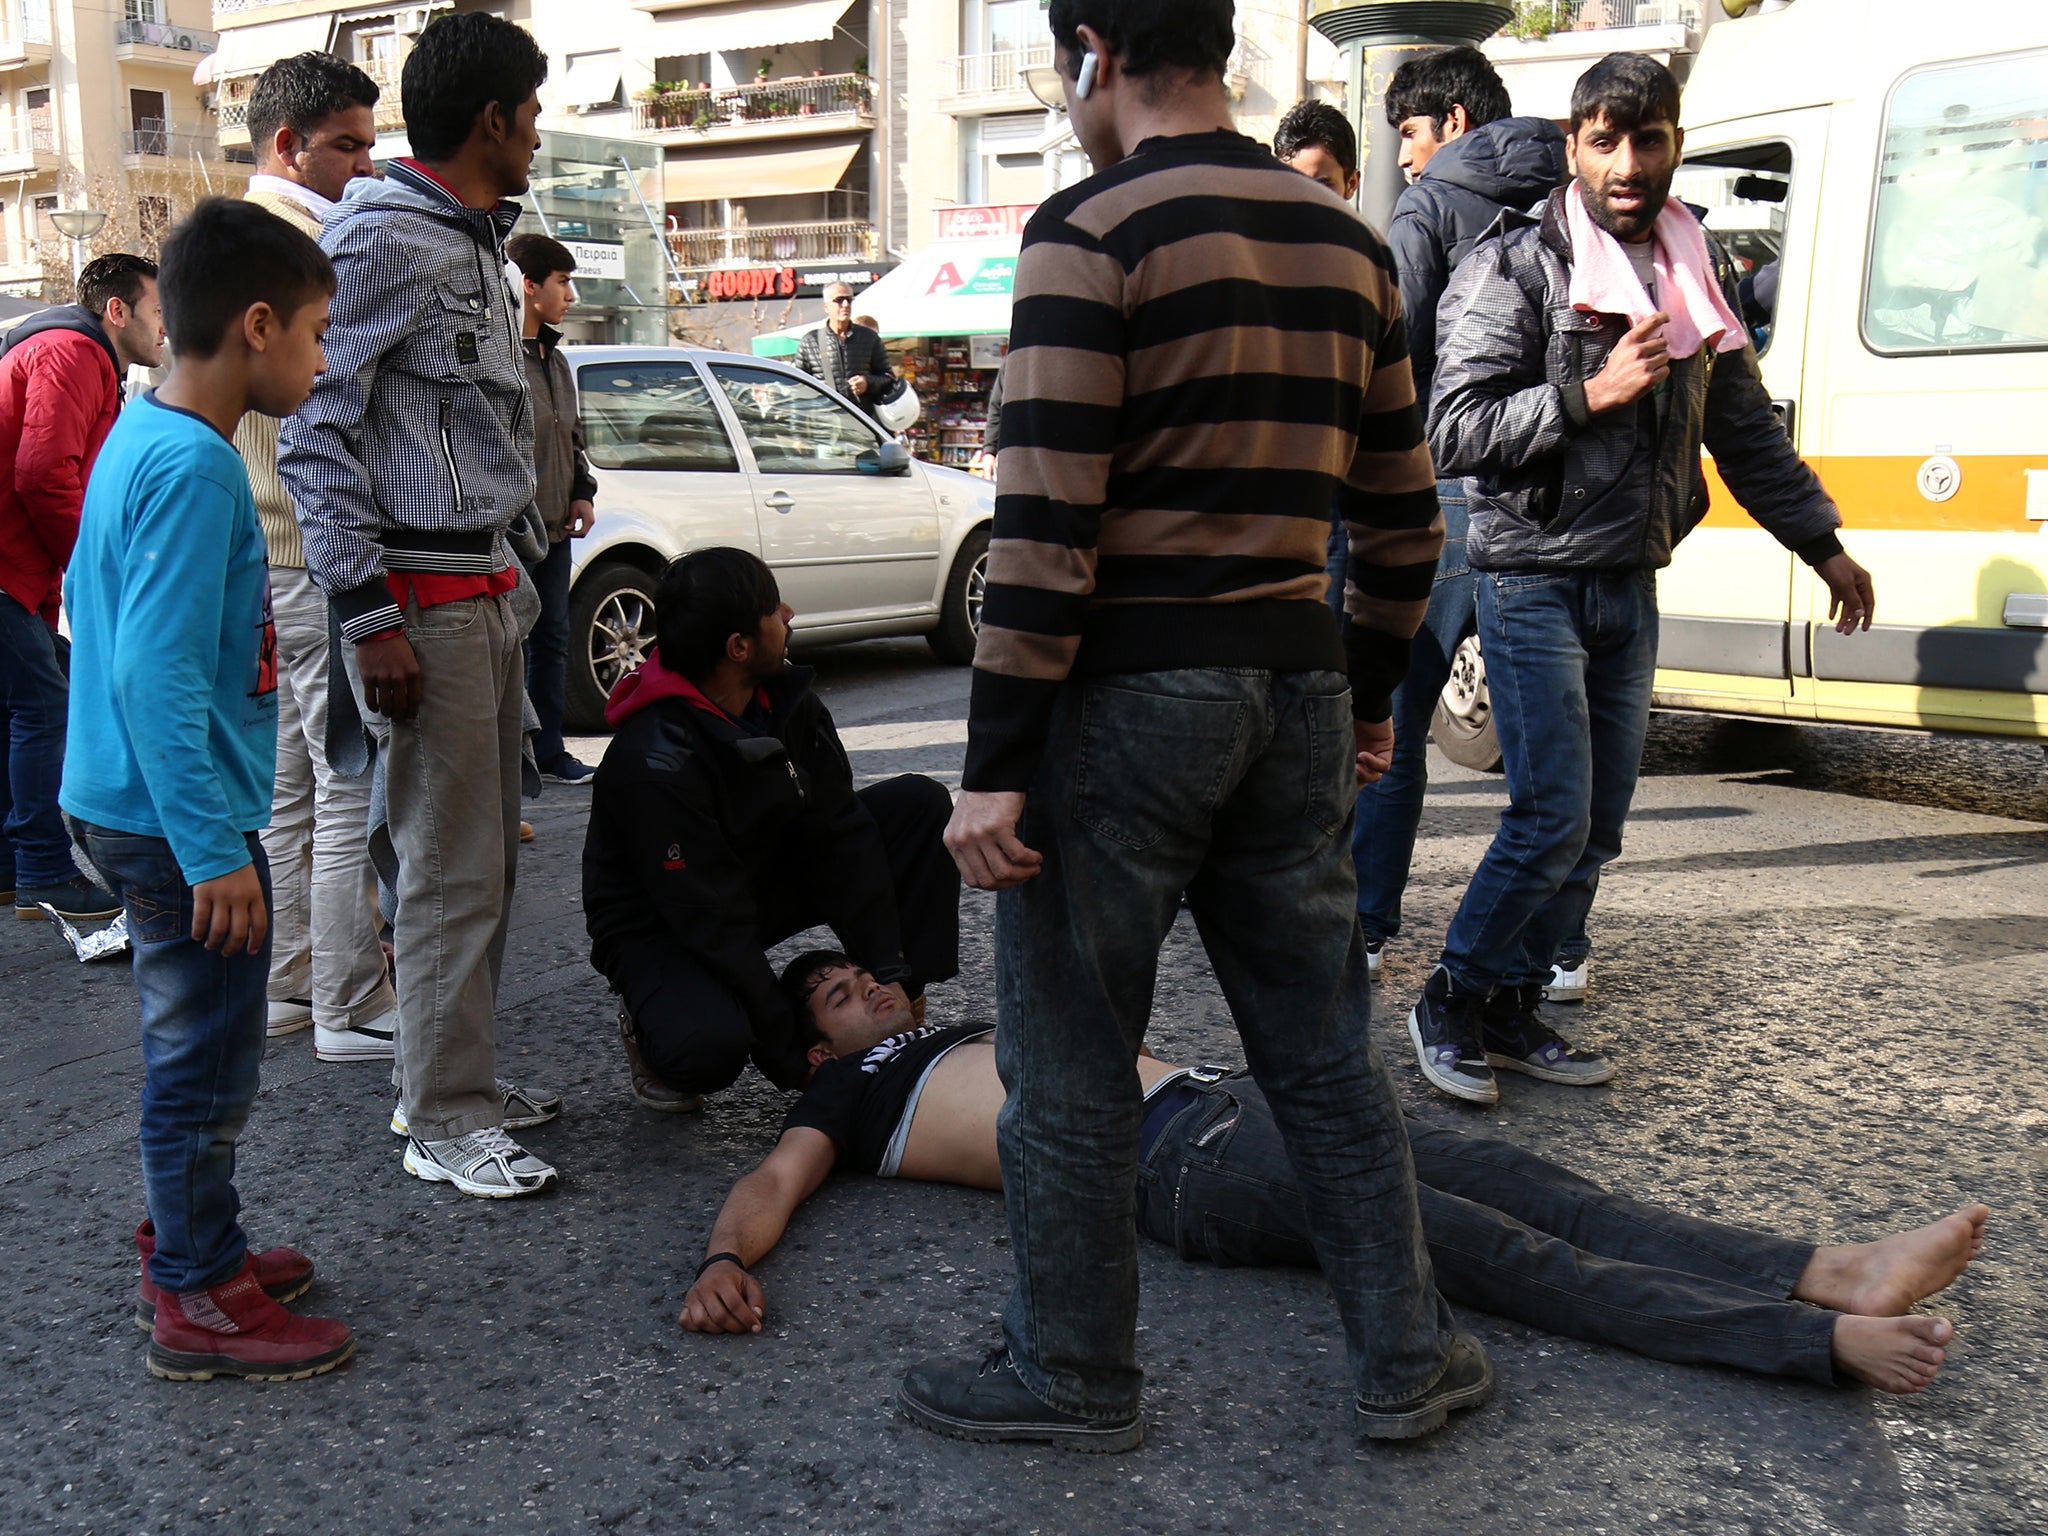 A Pakistani man, who tried to commit suicide by hanging himself with twisted lengths of fabric from a tree, lies on the street as other migrants wait for the ambulance in central Athens' Victoria Square